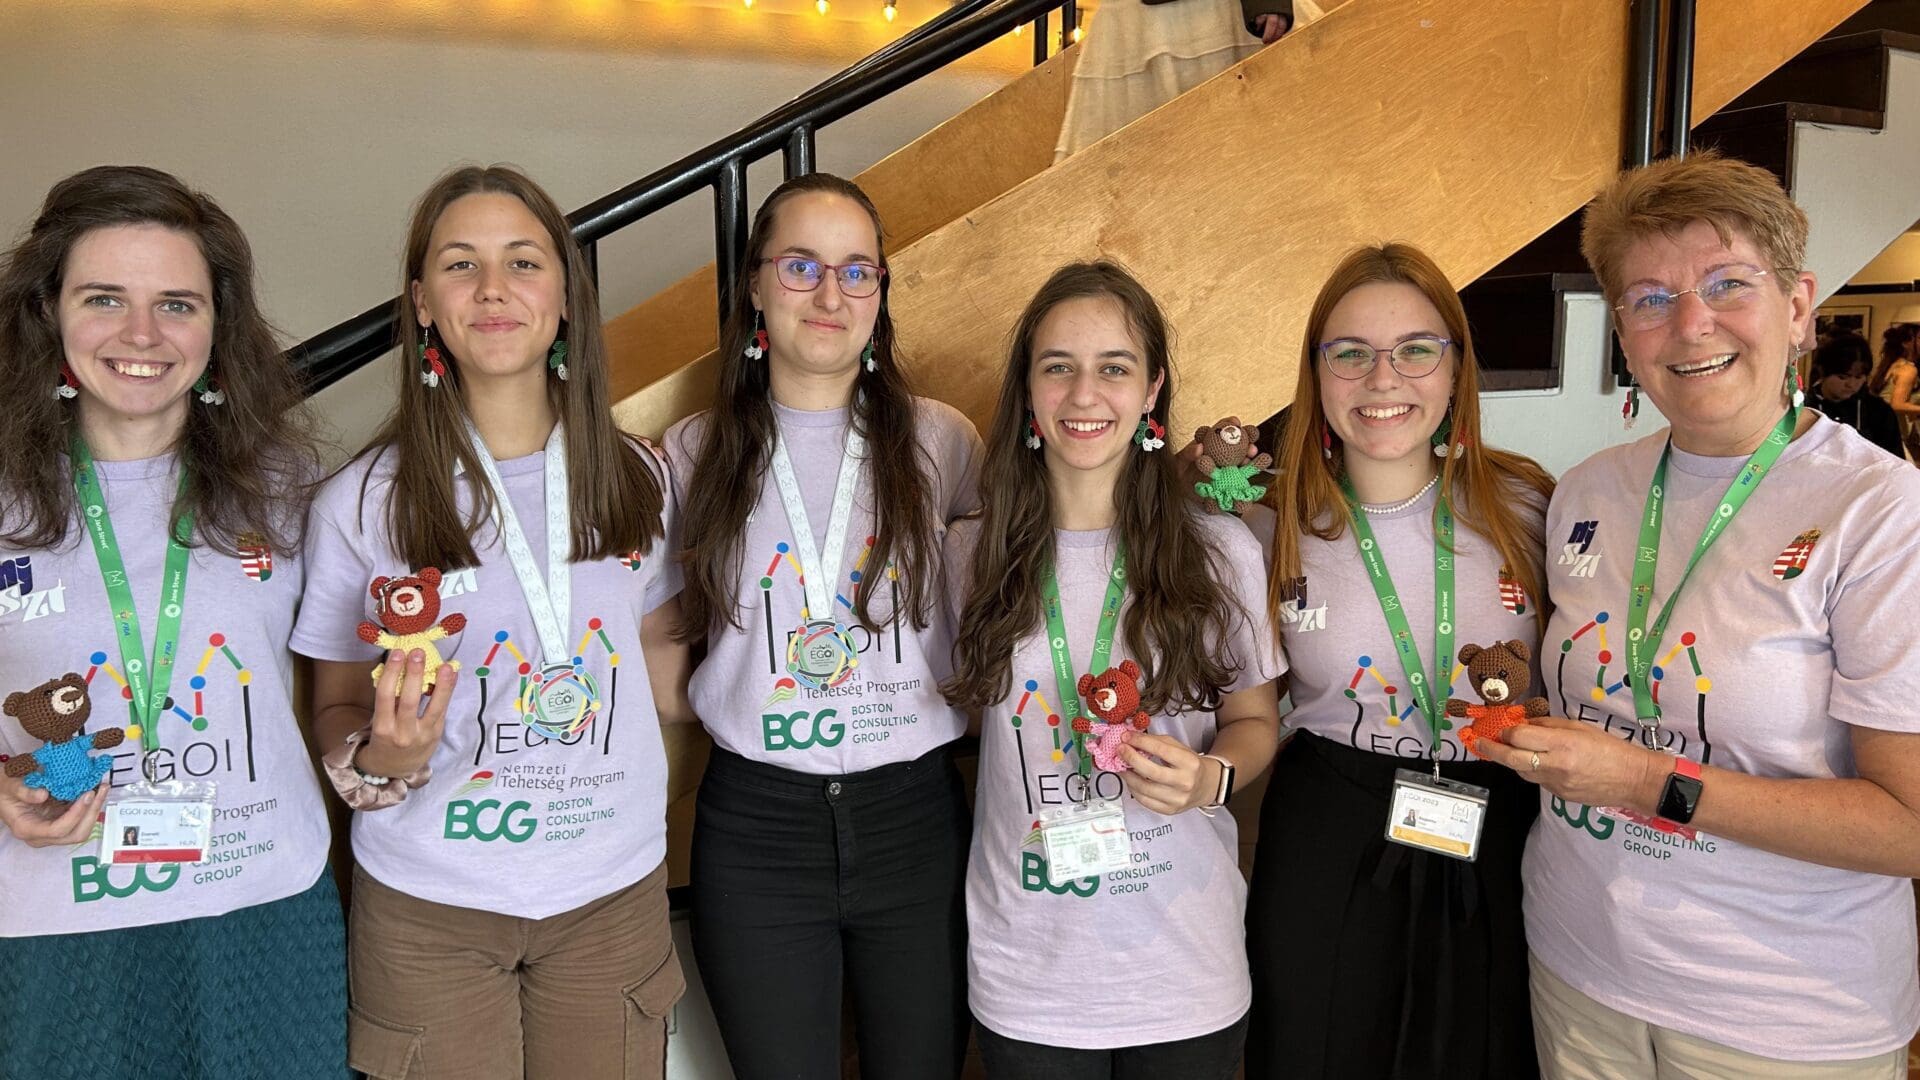 The members of the Hungarian team at the 2023 EGOI competition in Lund, Sweden.